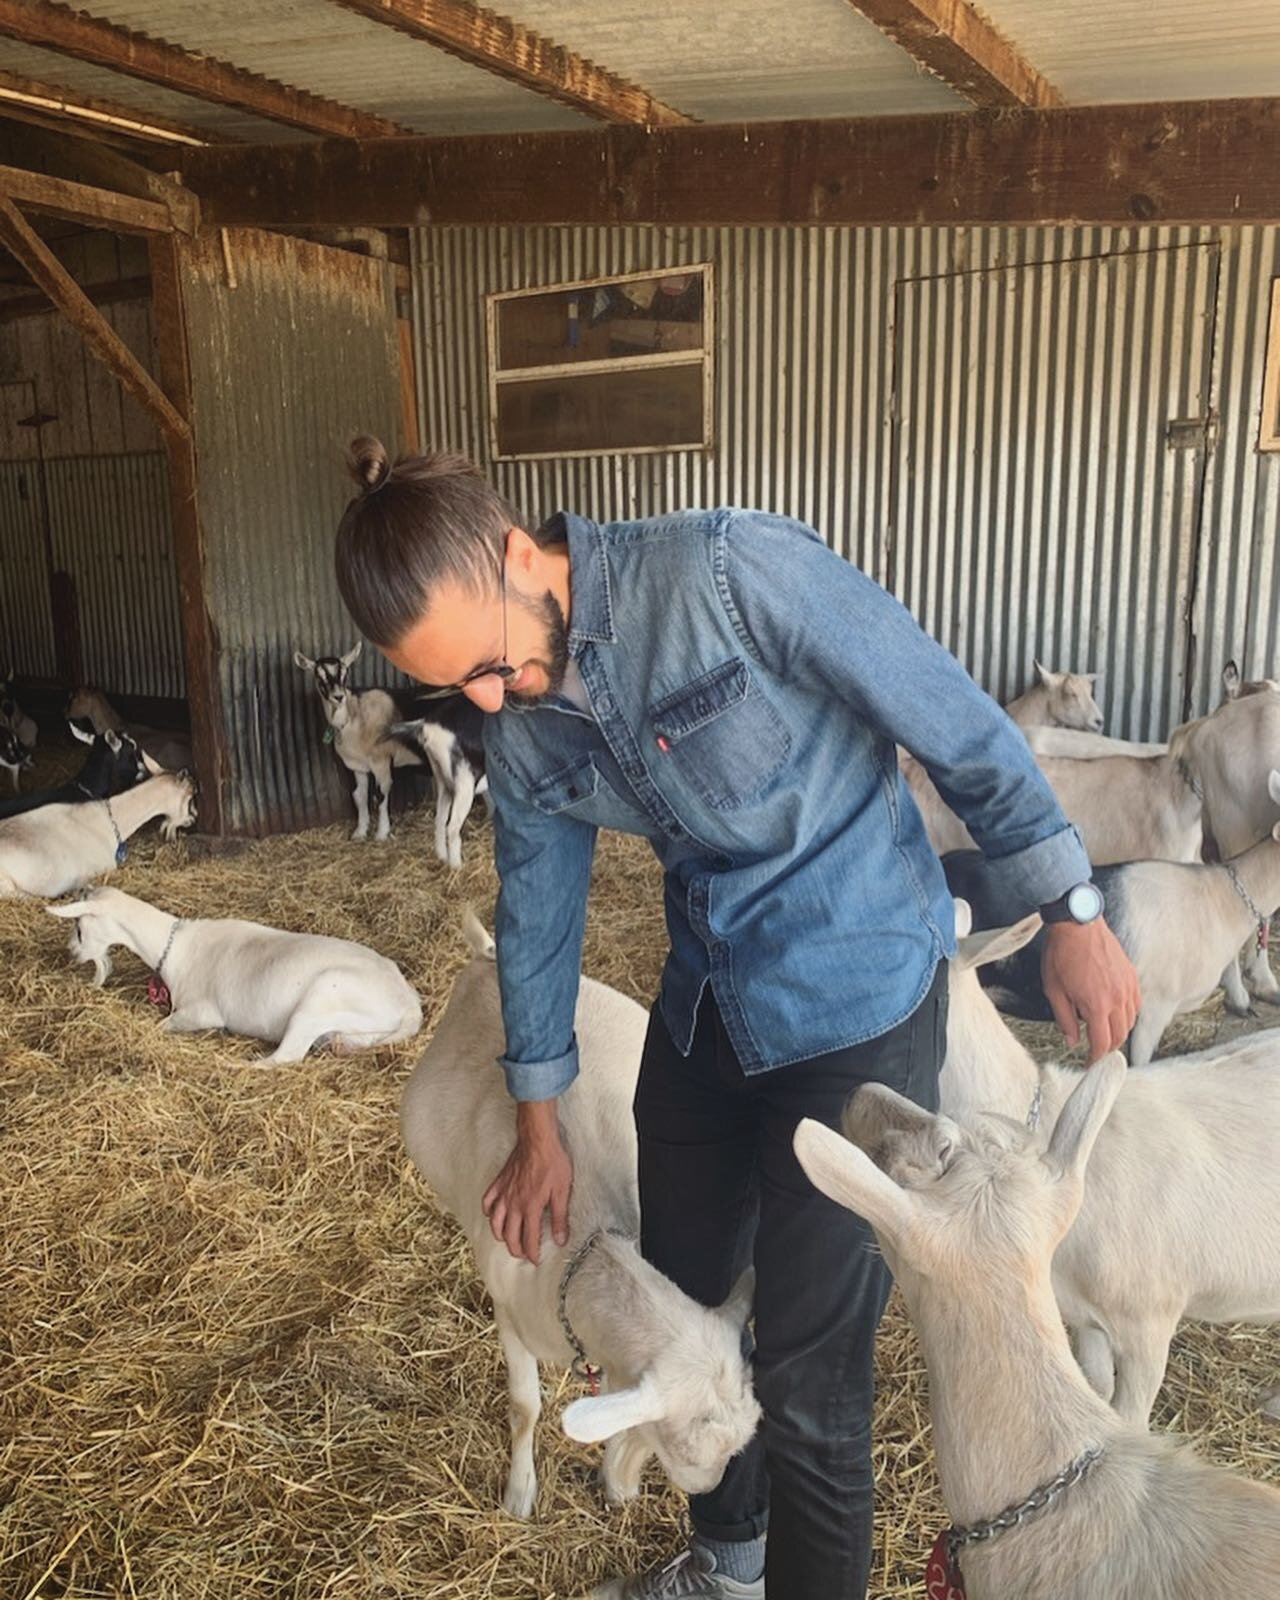 My visit to @harleyfarms was the greatest of all&hellip; the visits. 
.
#GOAT #goats #farmfriends